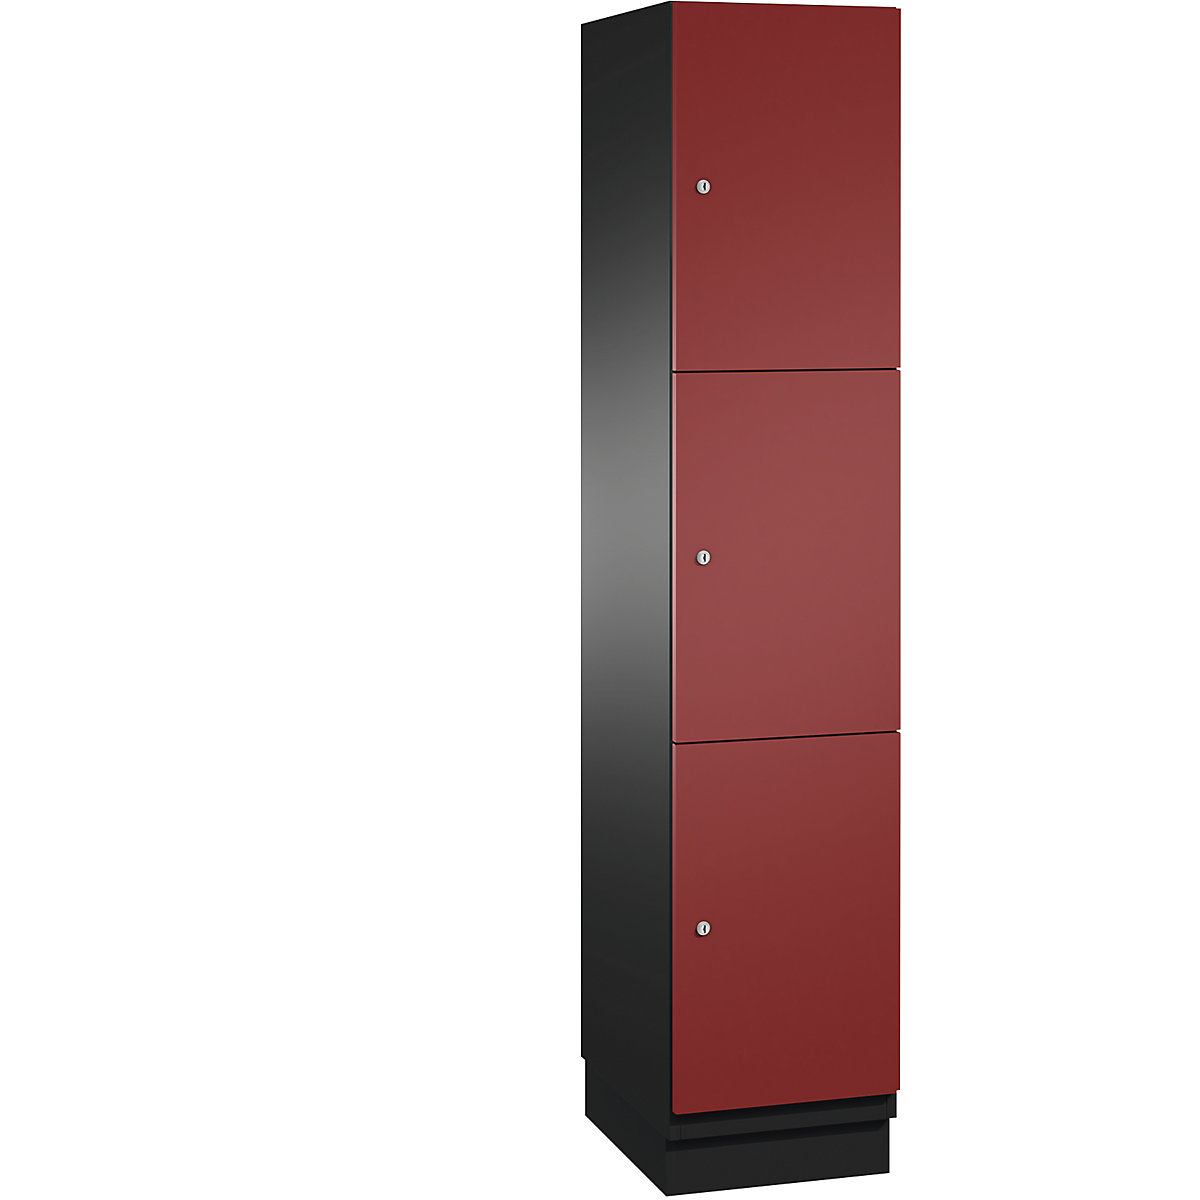 CAMBIO compartment locker with sheet steel doors – C+P, 3 compartments, width 400 mm, body black grey / door ruby red-3